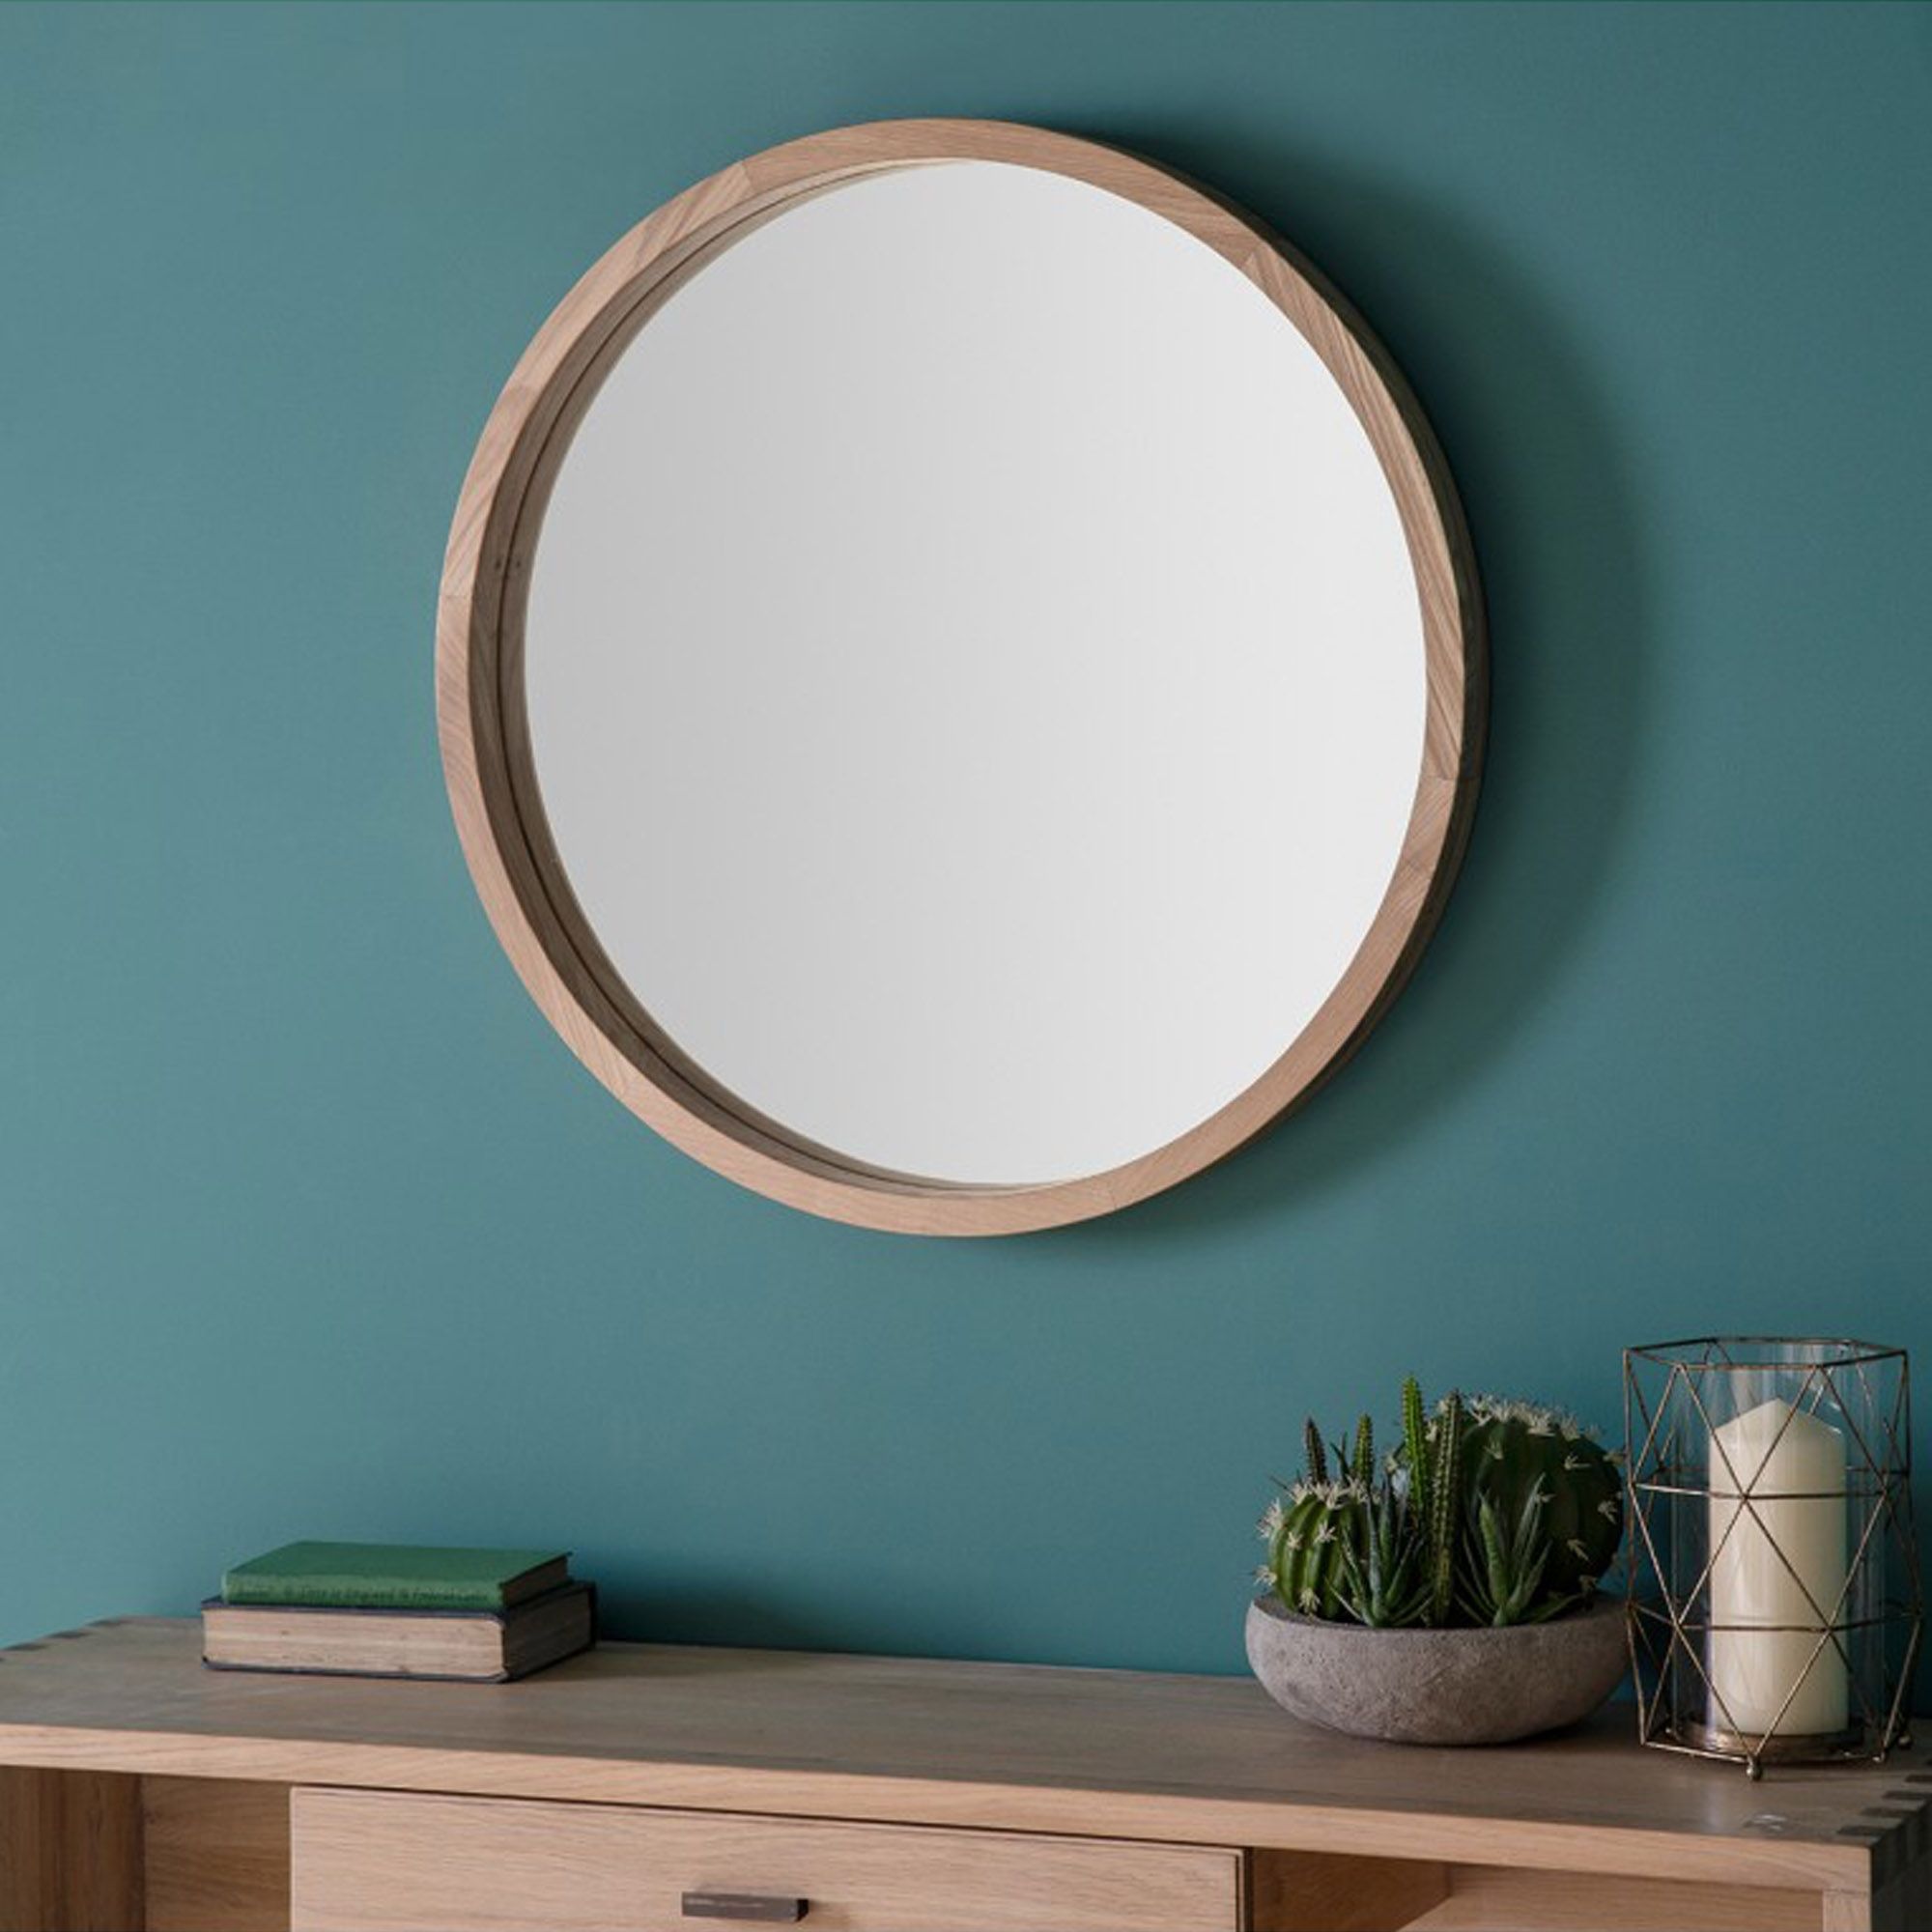 Bowman Small Round Wall Mirror | Wall Mirrors | Homesdirect365 Inside Round 4 Section Wall Mirrors (View 10 of 15)